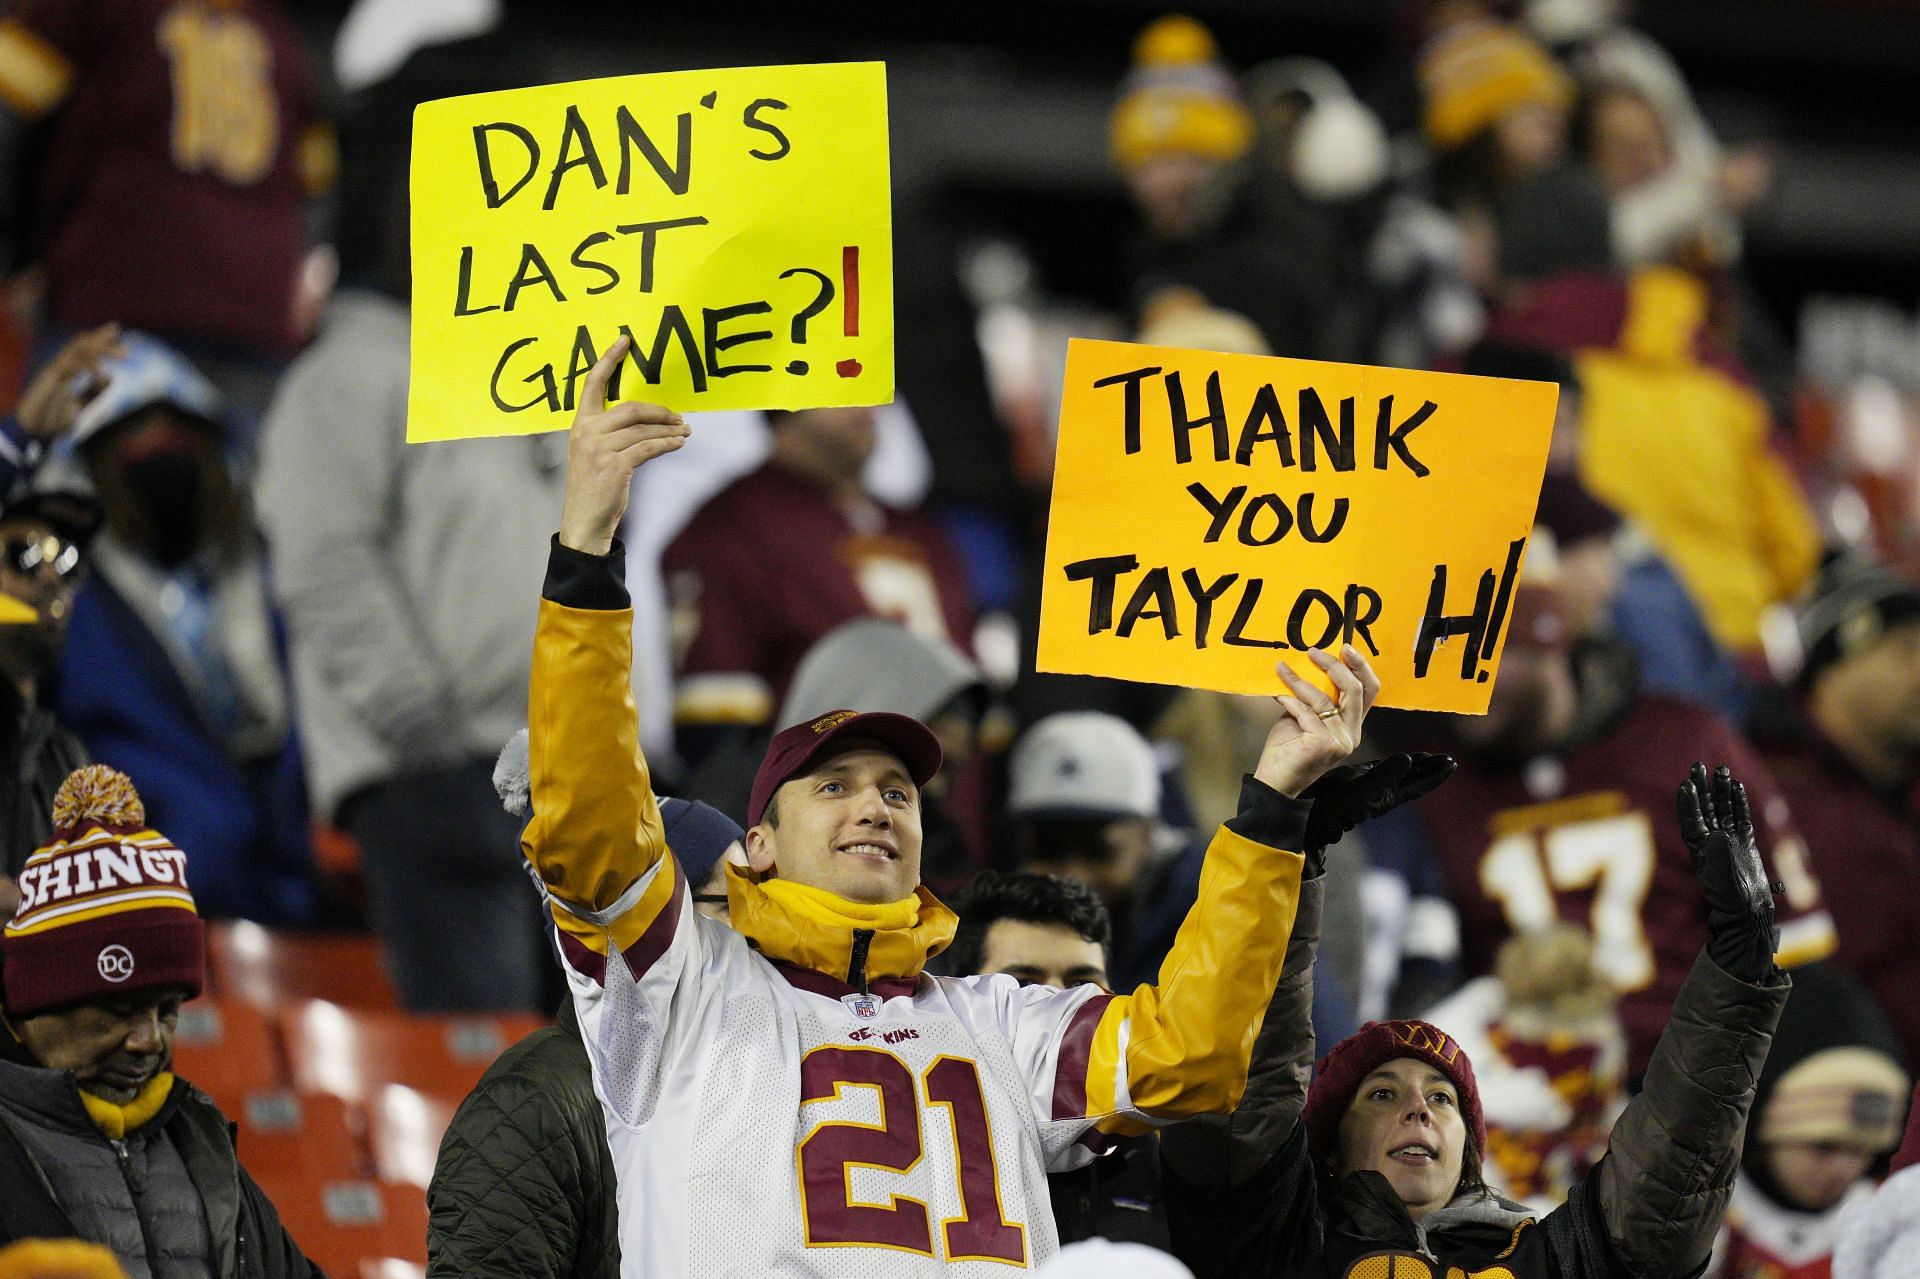 Fans were hoping to see the day Dan Snyder was gone. It has come.